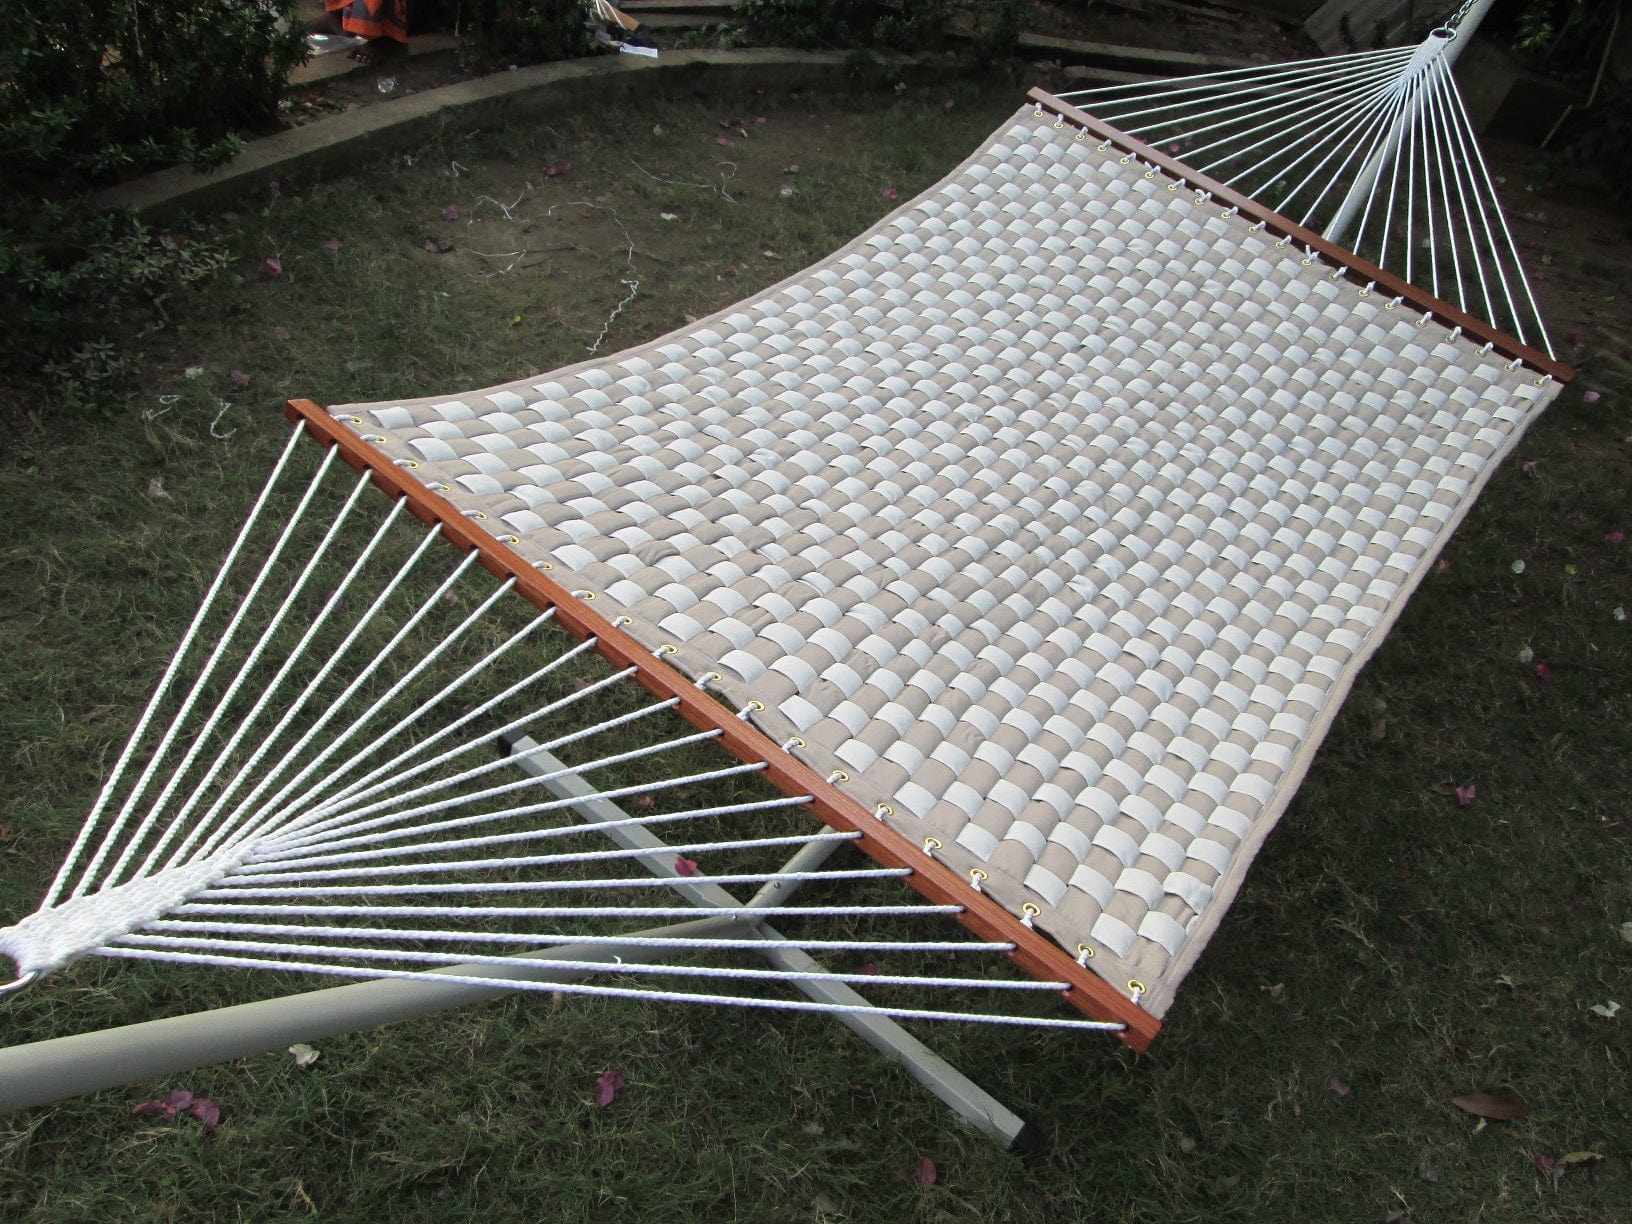 Outdoor Tan & Flax Checkered Quilted Hammock With Steel Hammock Stand Frame